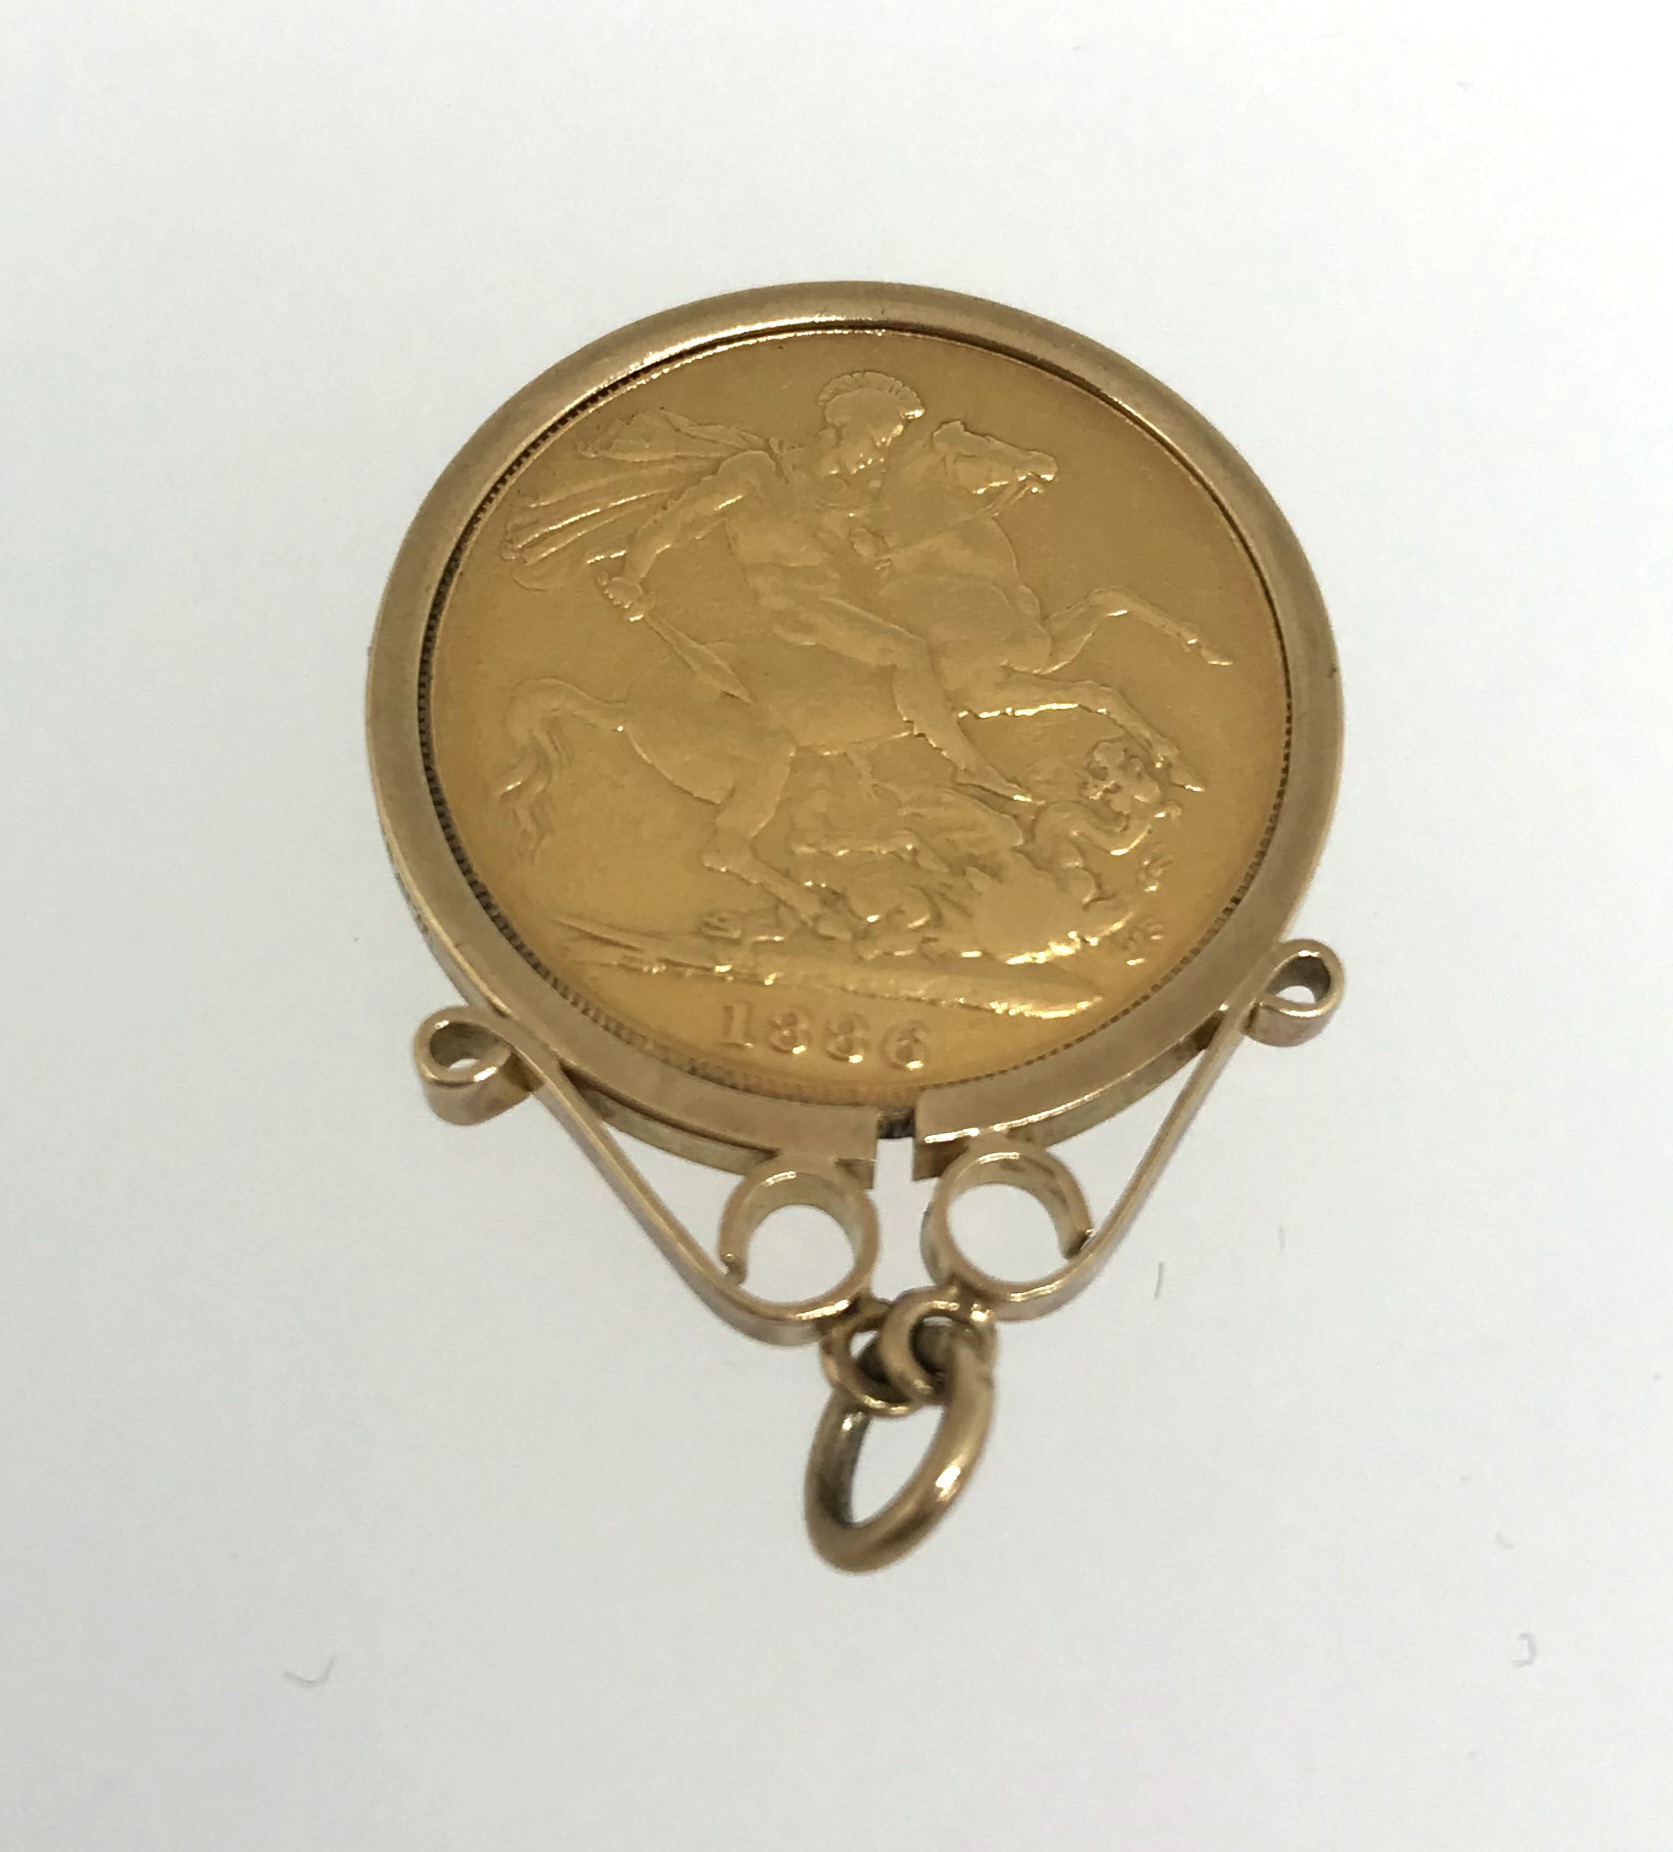 Victoria, 1886 sovereign, bunhead, M, mounted as a pendant, total weight 9.8gms. - Image 2 of 2